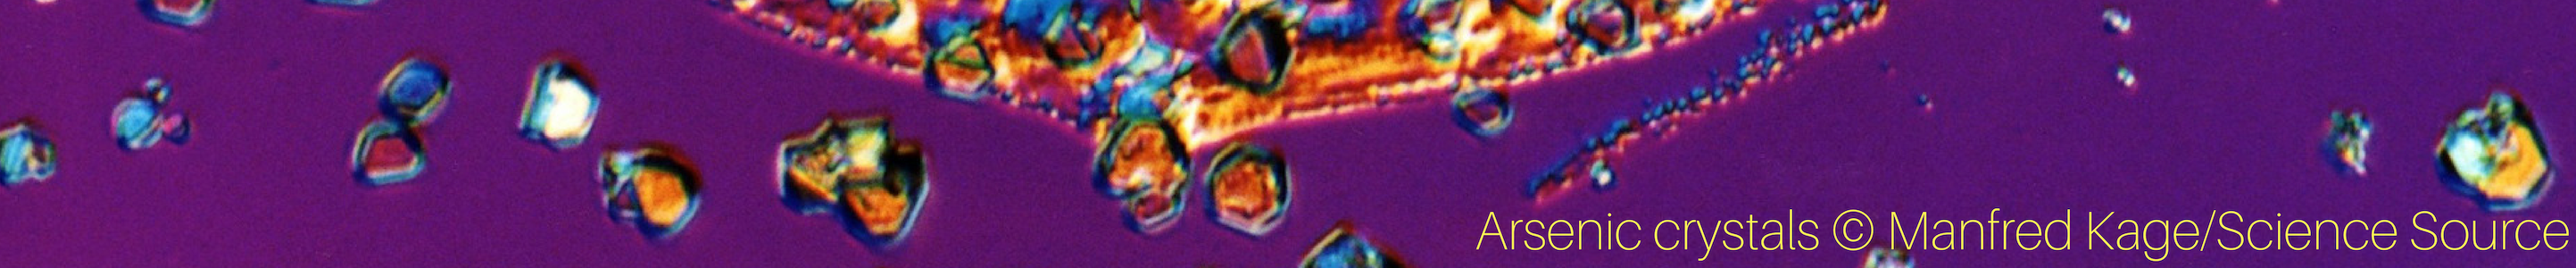 Light micrograph of arsenic crystals